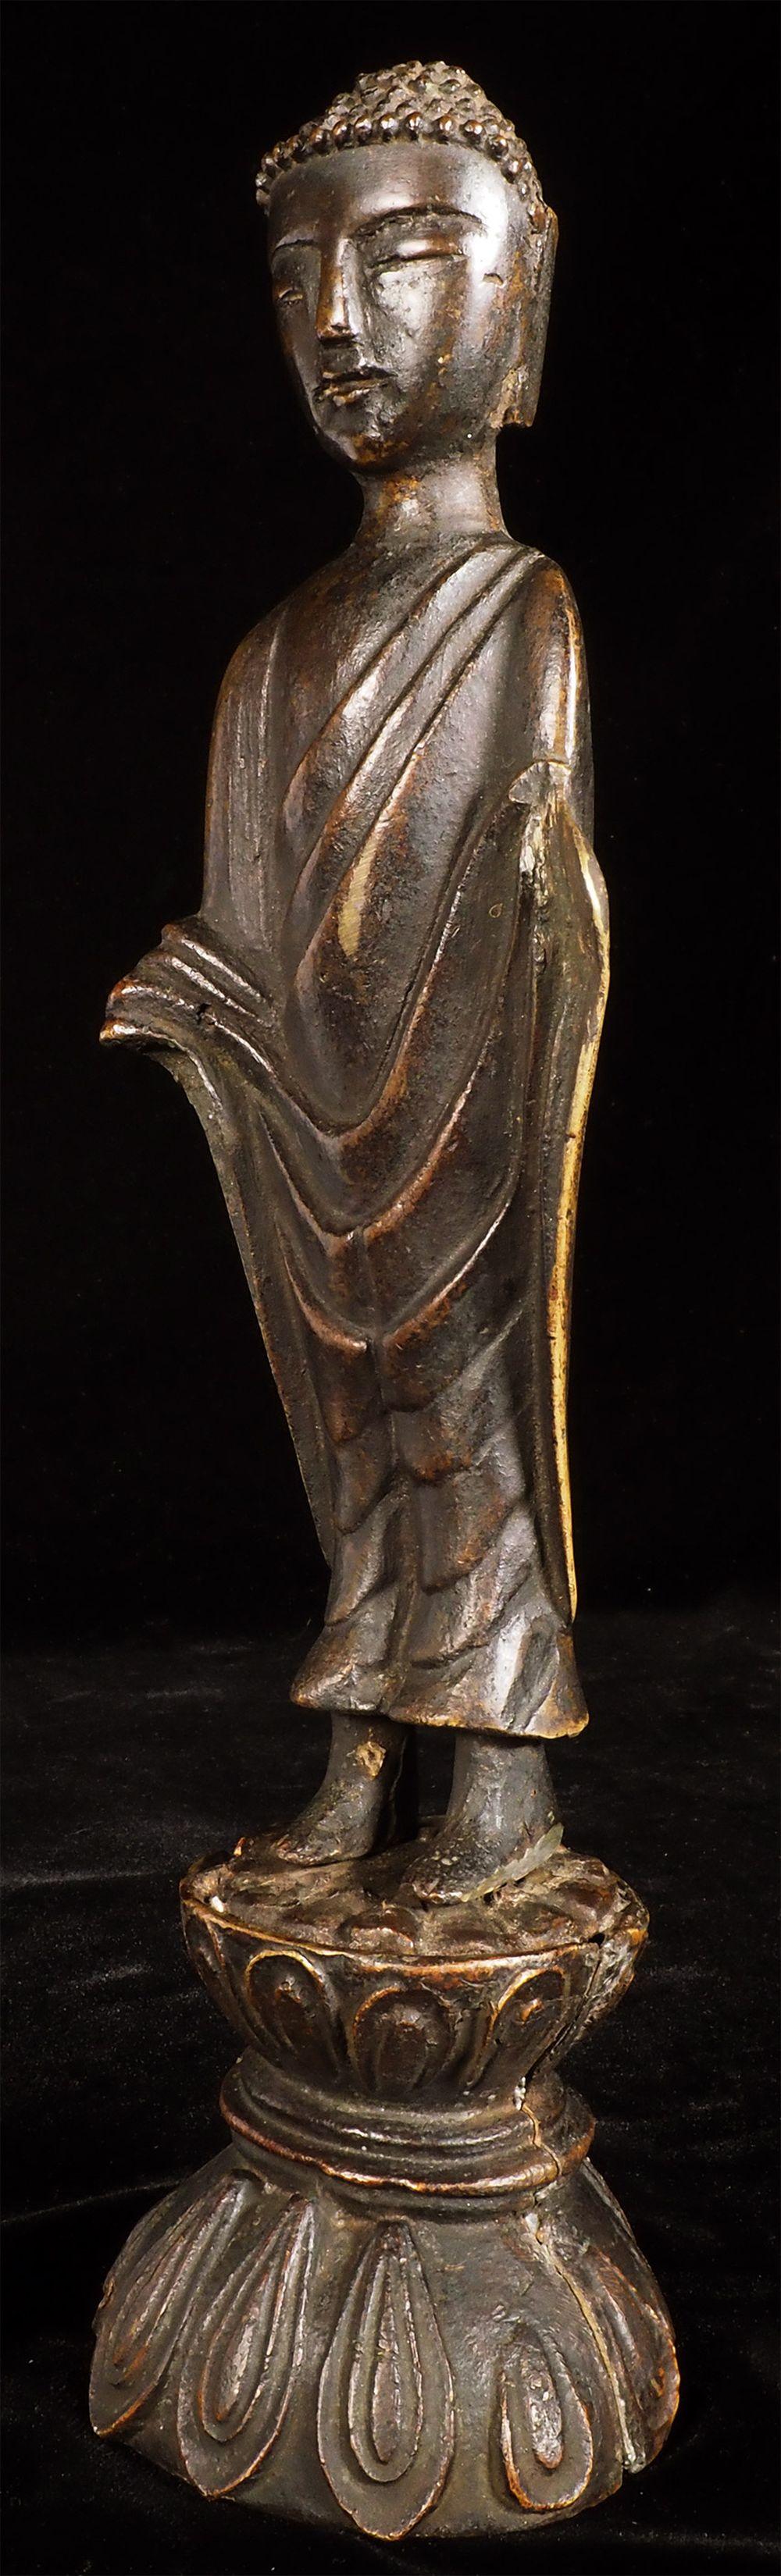 Cast 15thC/Earlier Possibly Korean Bronze Buddha-Large, one of a kind, 8343 For Sale